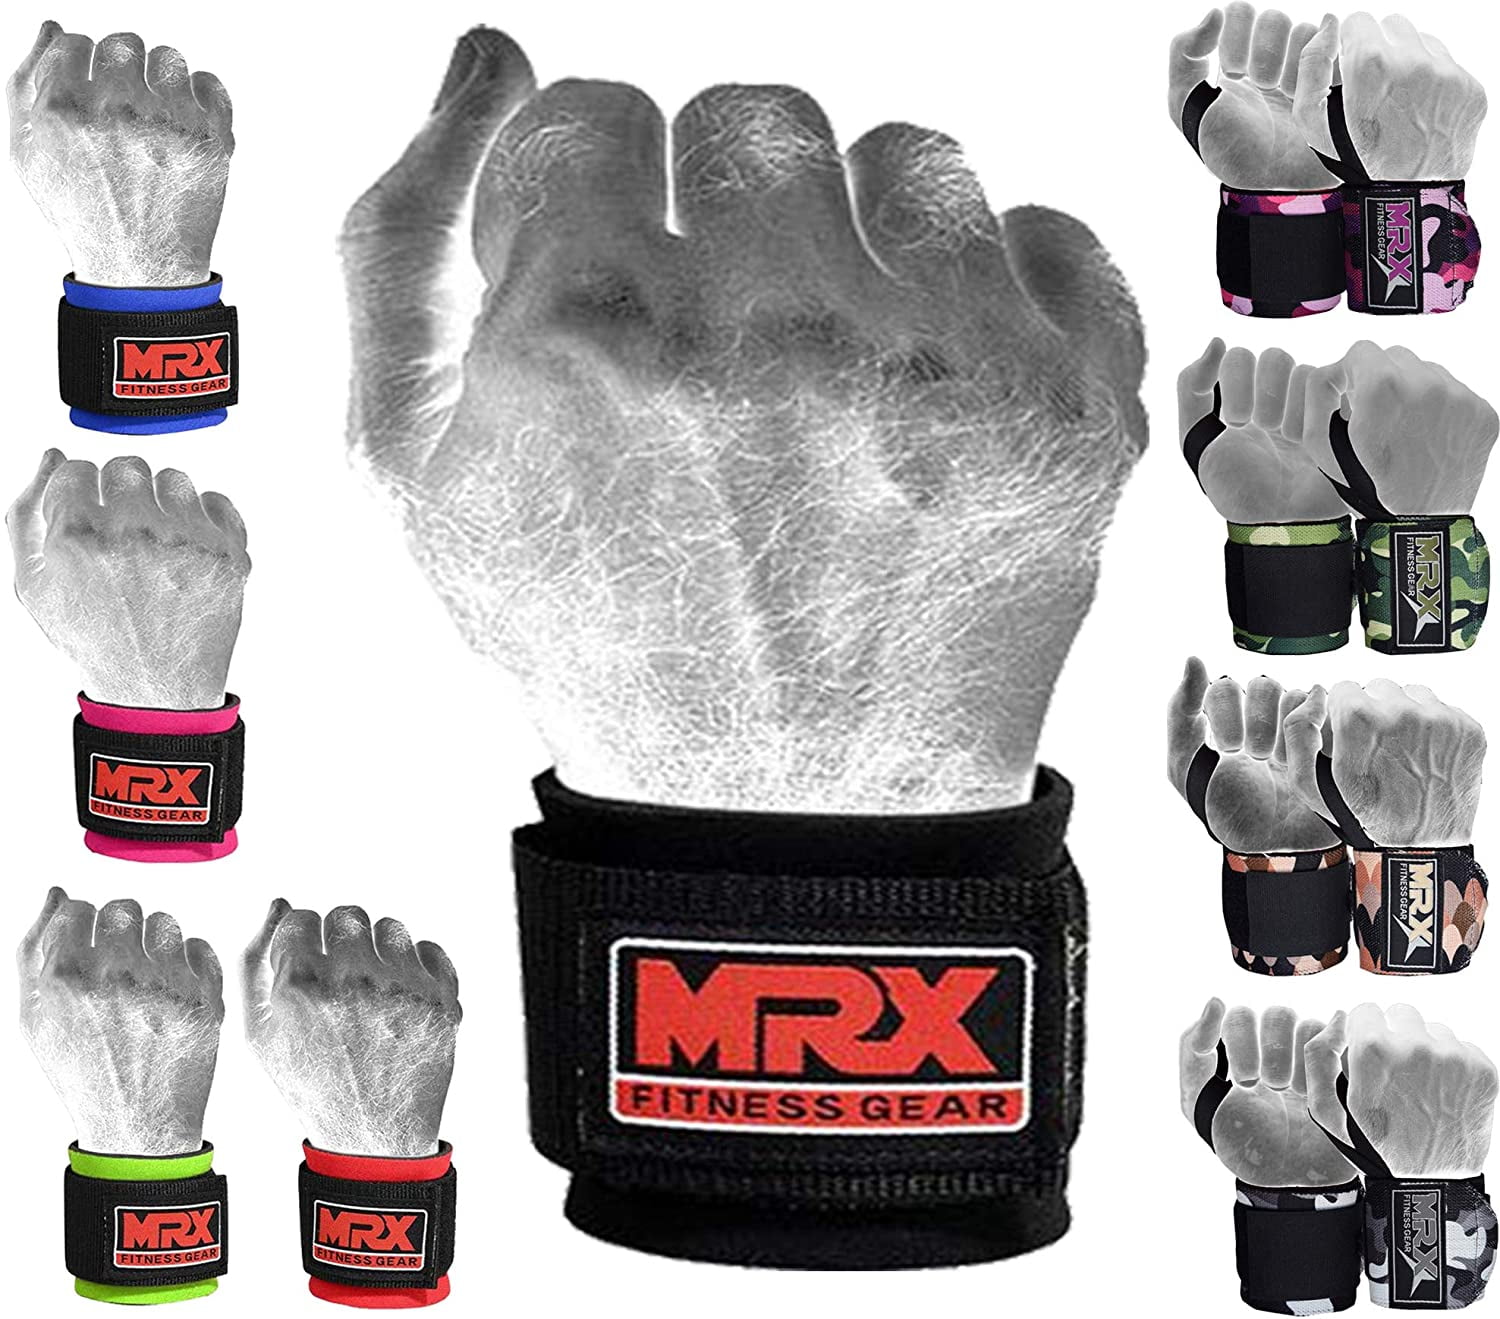 Weight Lifting Wrist Wraps Crossfit Strength Training Wrist Straps Wrist Support 